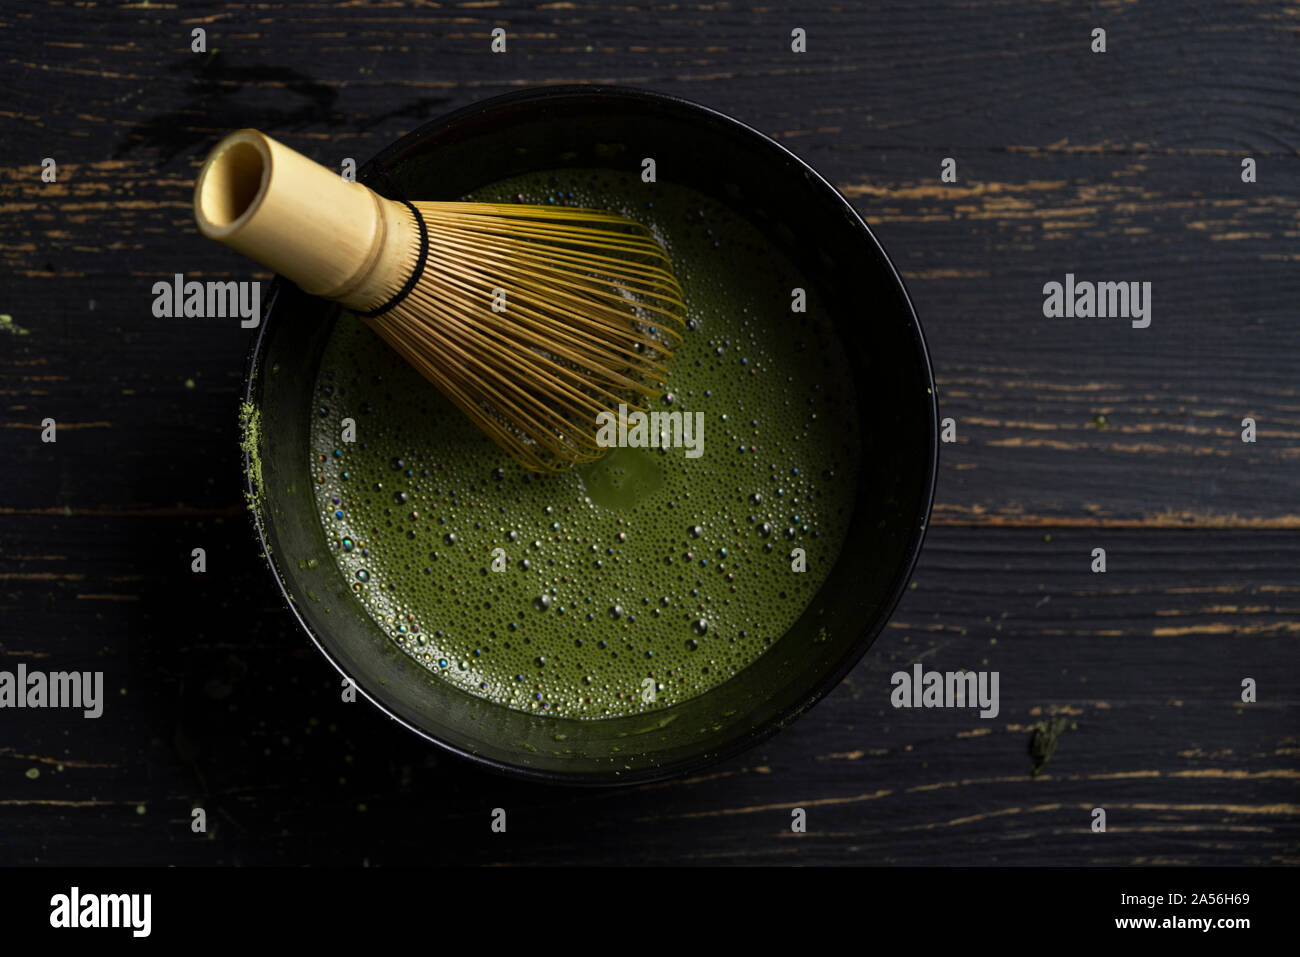 Still life of matcha tea preparation with whisk in bowl of matcha tea, overhead view, low key Stock Photo